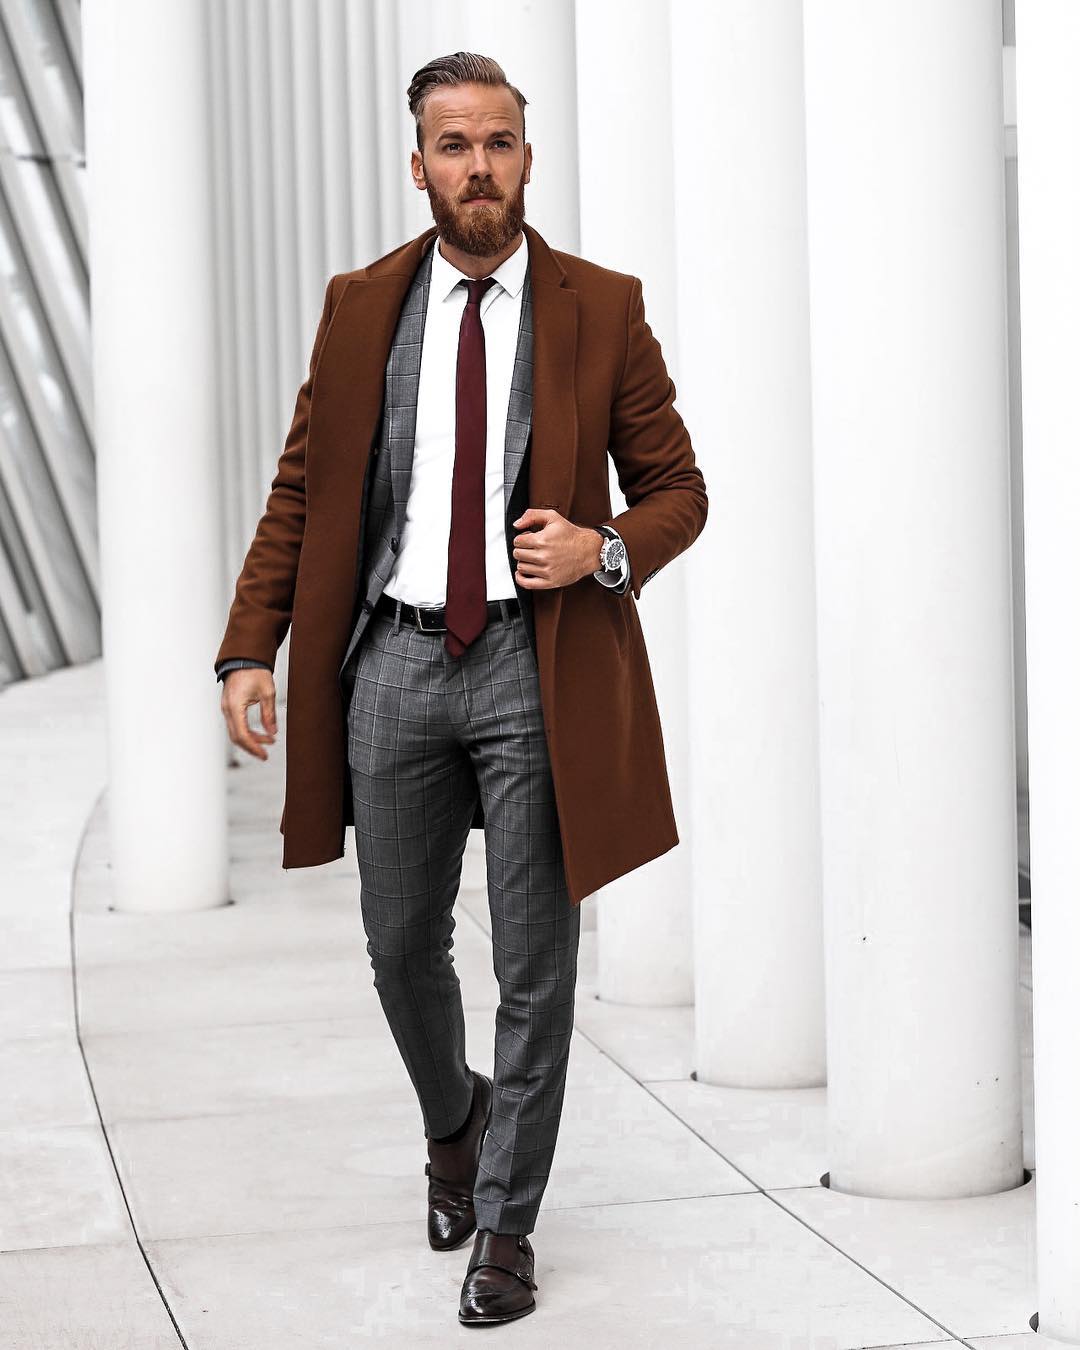 5 Formal Outfits To Make You Look Sharp At Work – LIFESTYLE BY PS